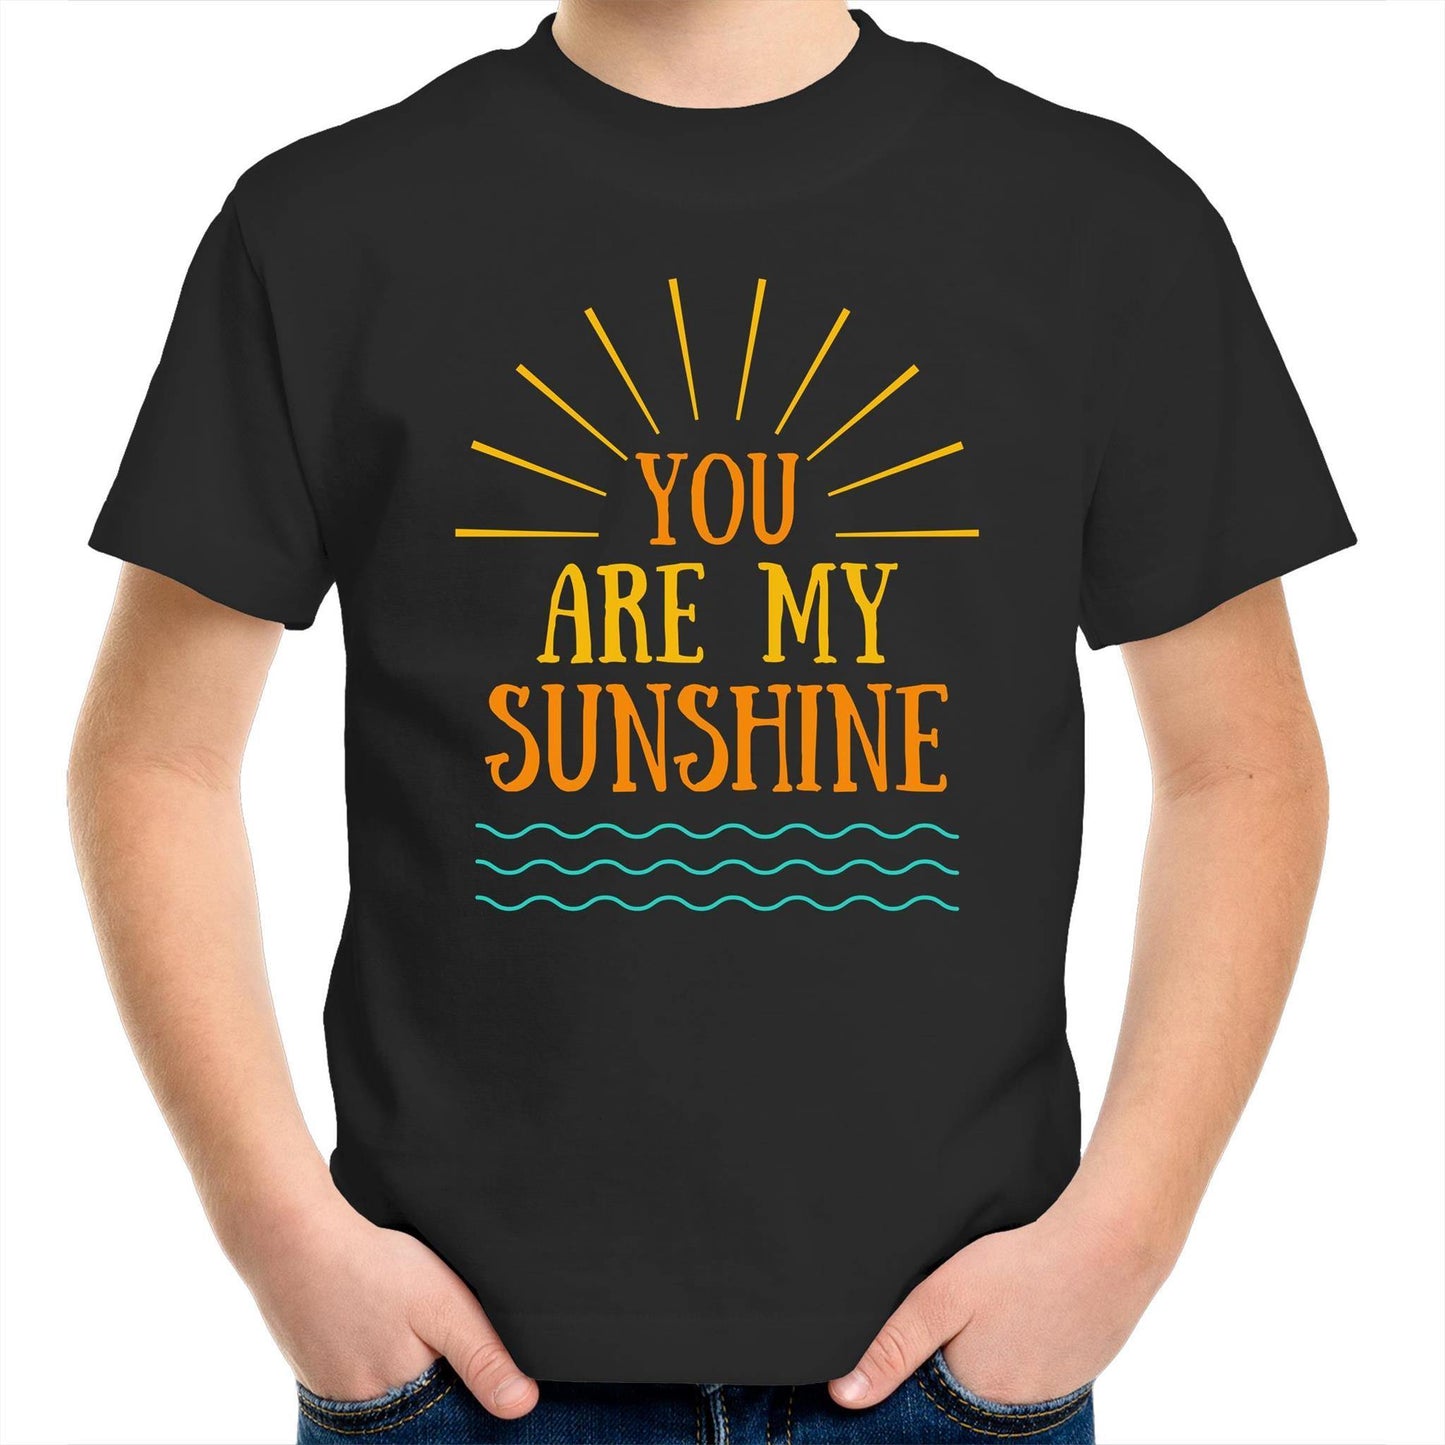 You Are My Sunshine - Kids Youth Crew T-Shirt Black Kids Youth T-shirt Summer